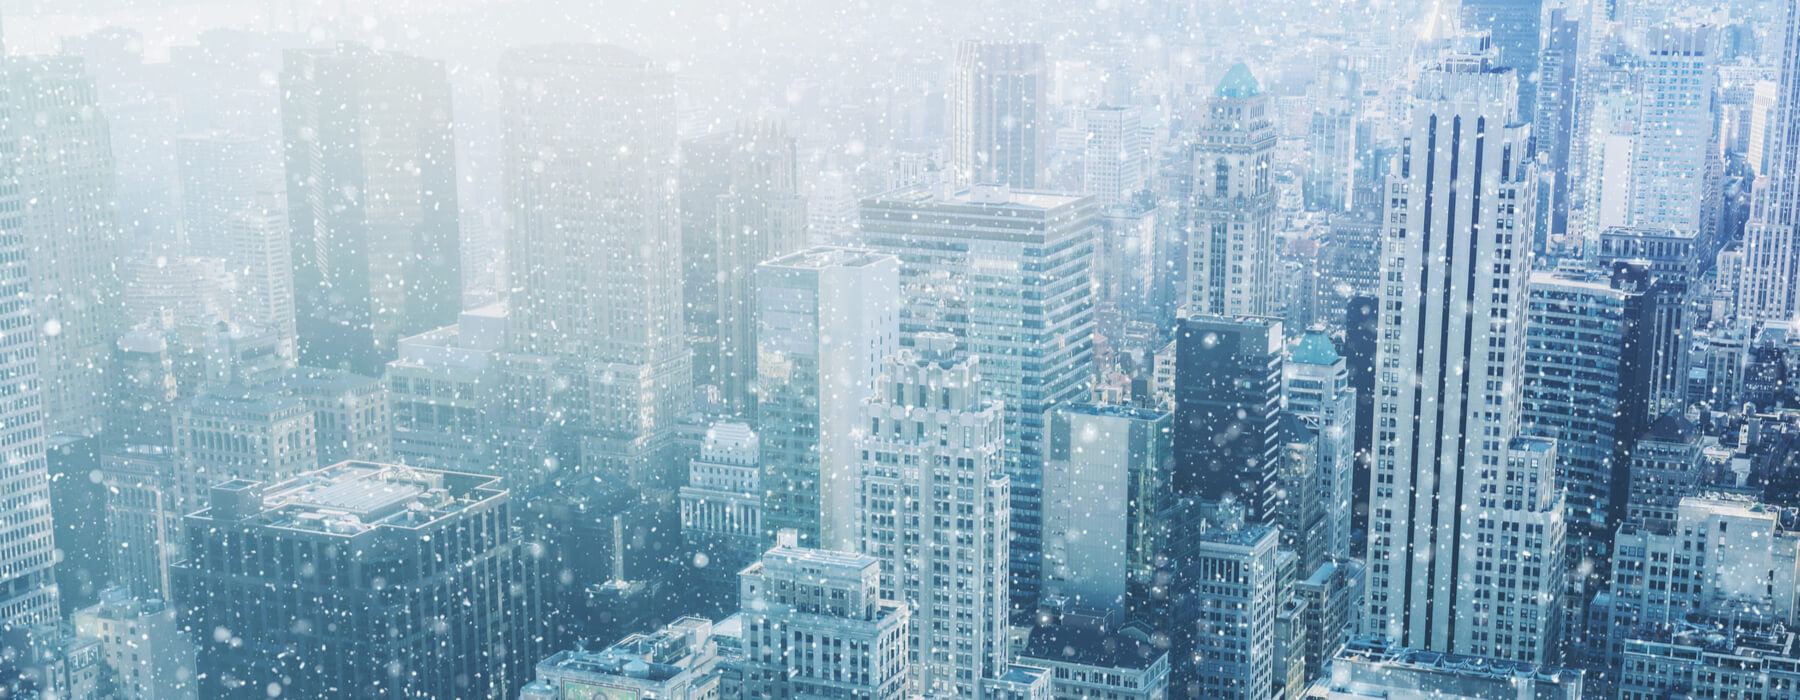 Are You a Building Owner? How to Cut Carbon Emissions During Winter